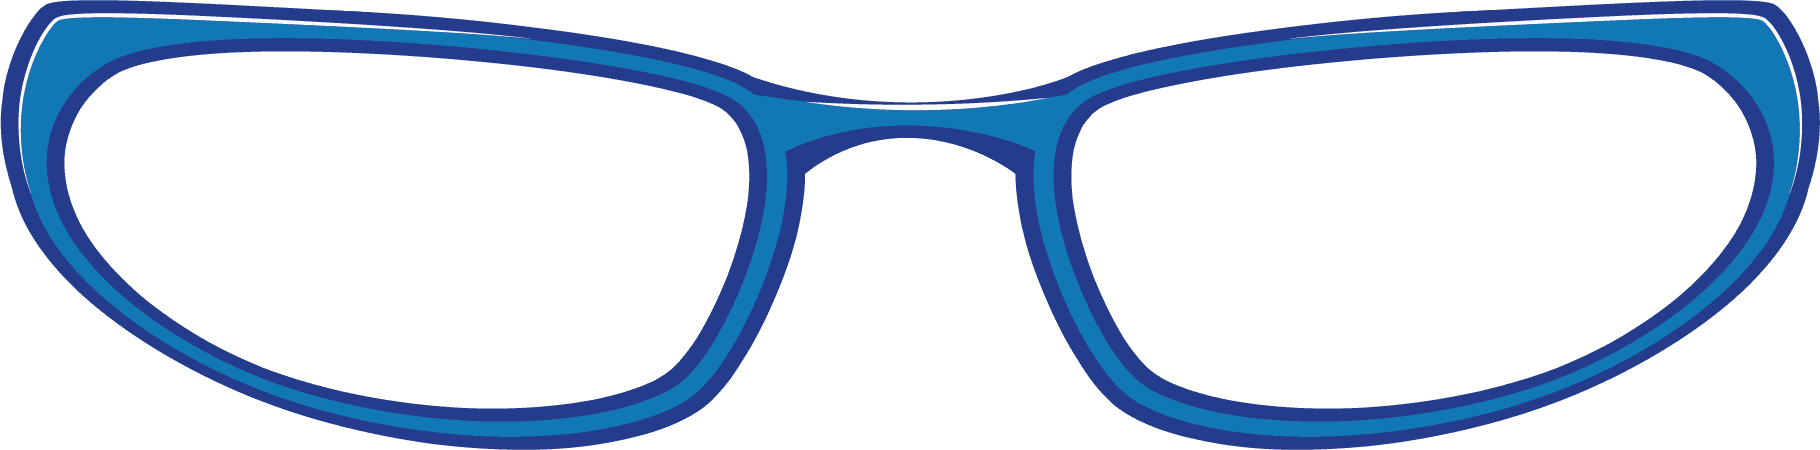 clip art pictures of eyeglasses - photo #33